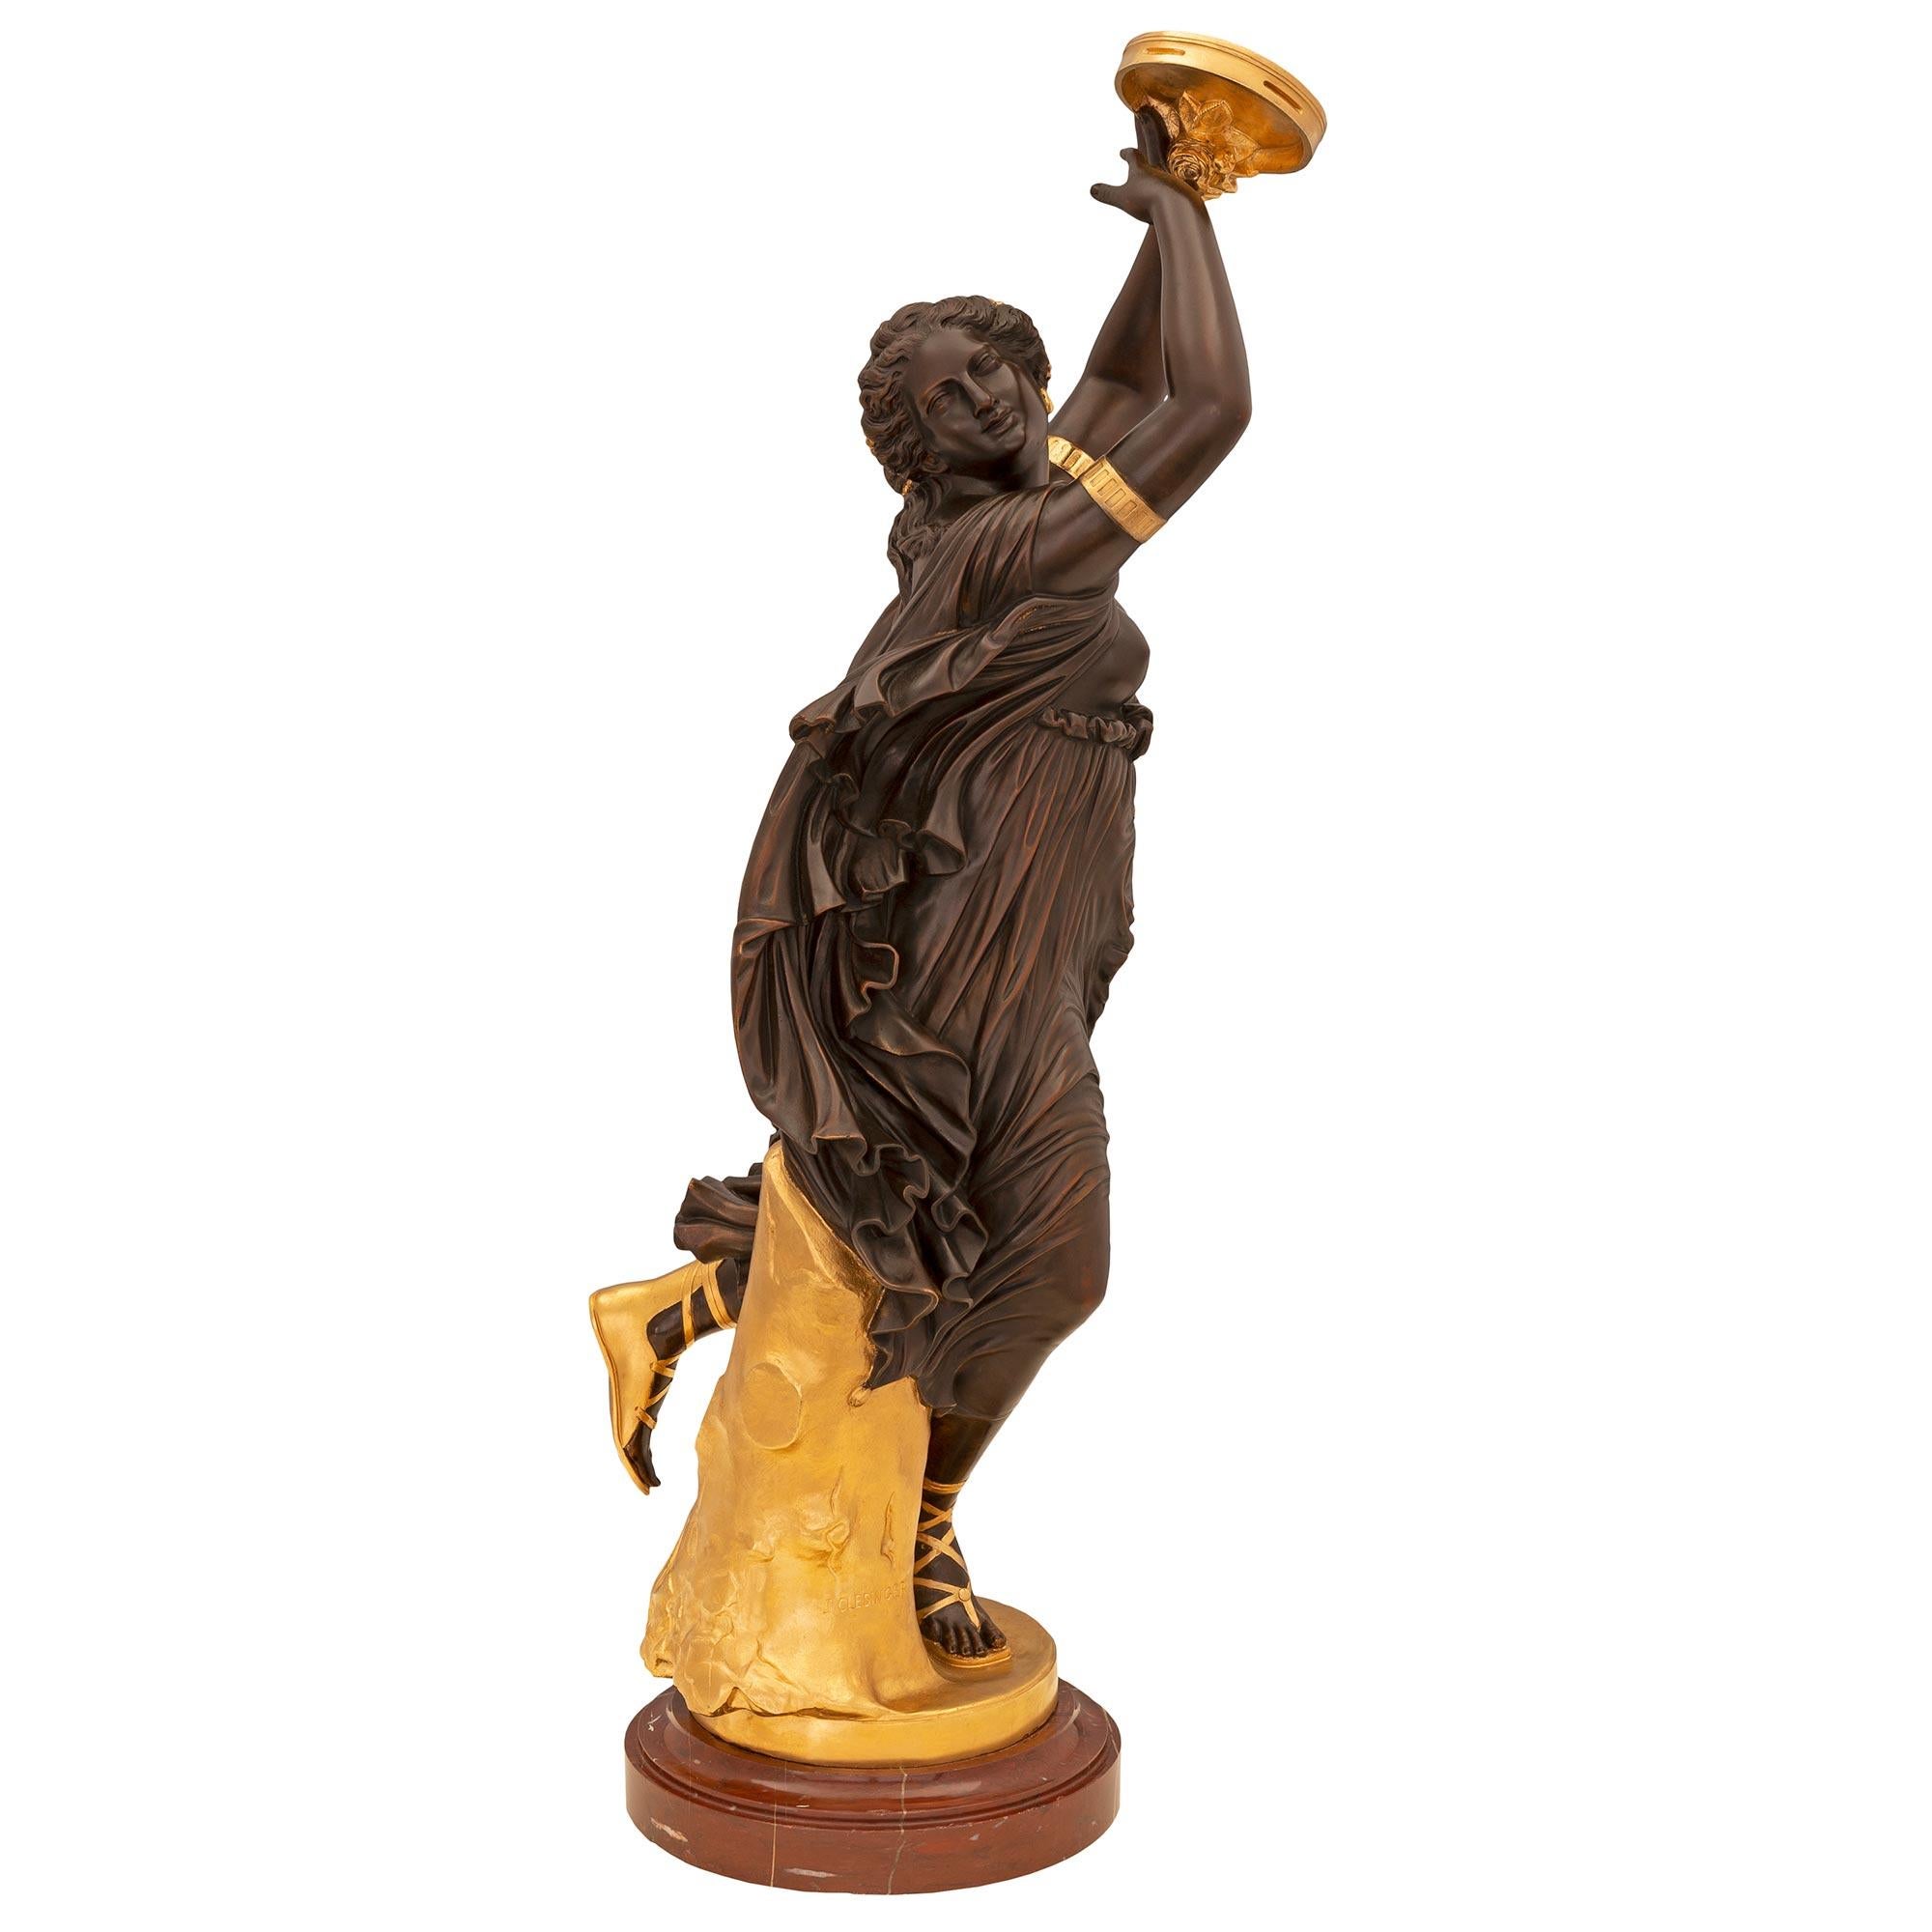 French 19th Century Patinated Bronze, Ormolu, And Marble Statue Signed Clésinger In Good Condition For Sale In West Palm Beach, FL